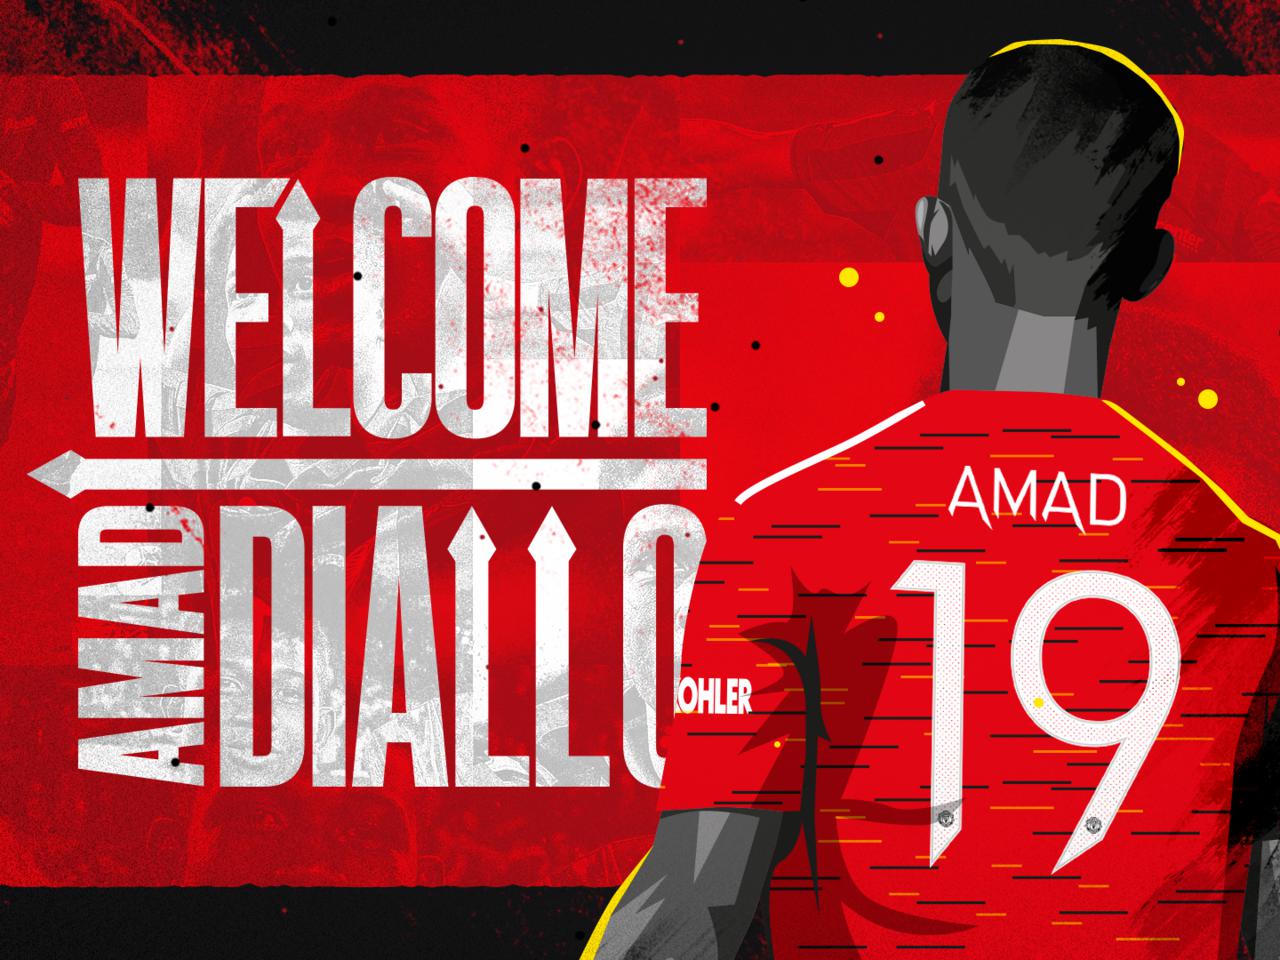 Amad Diallo joins Man Utd. Read the first exclusive interview